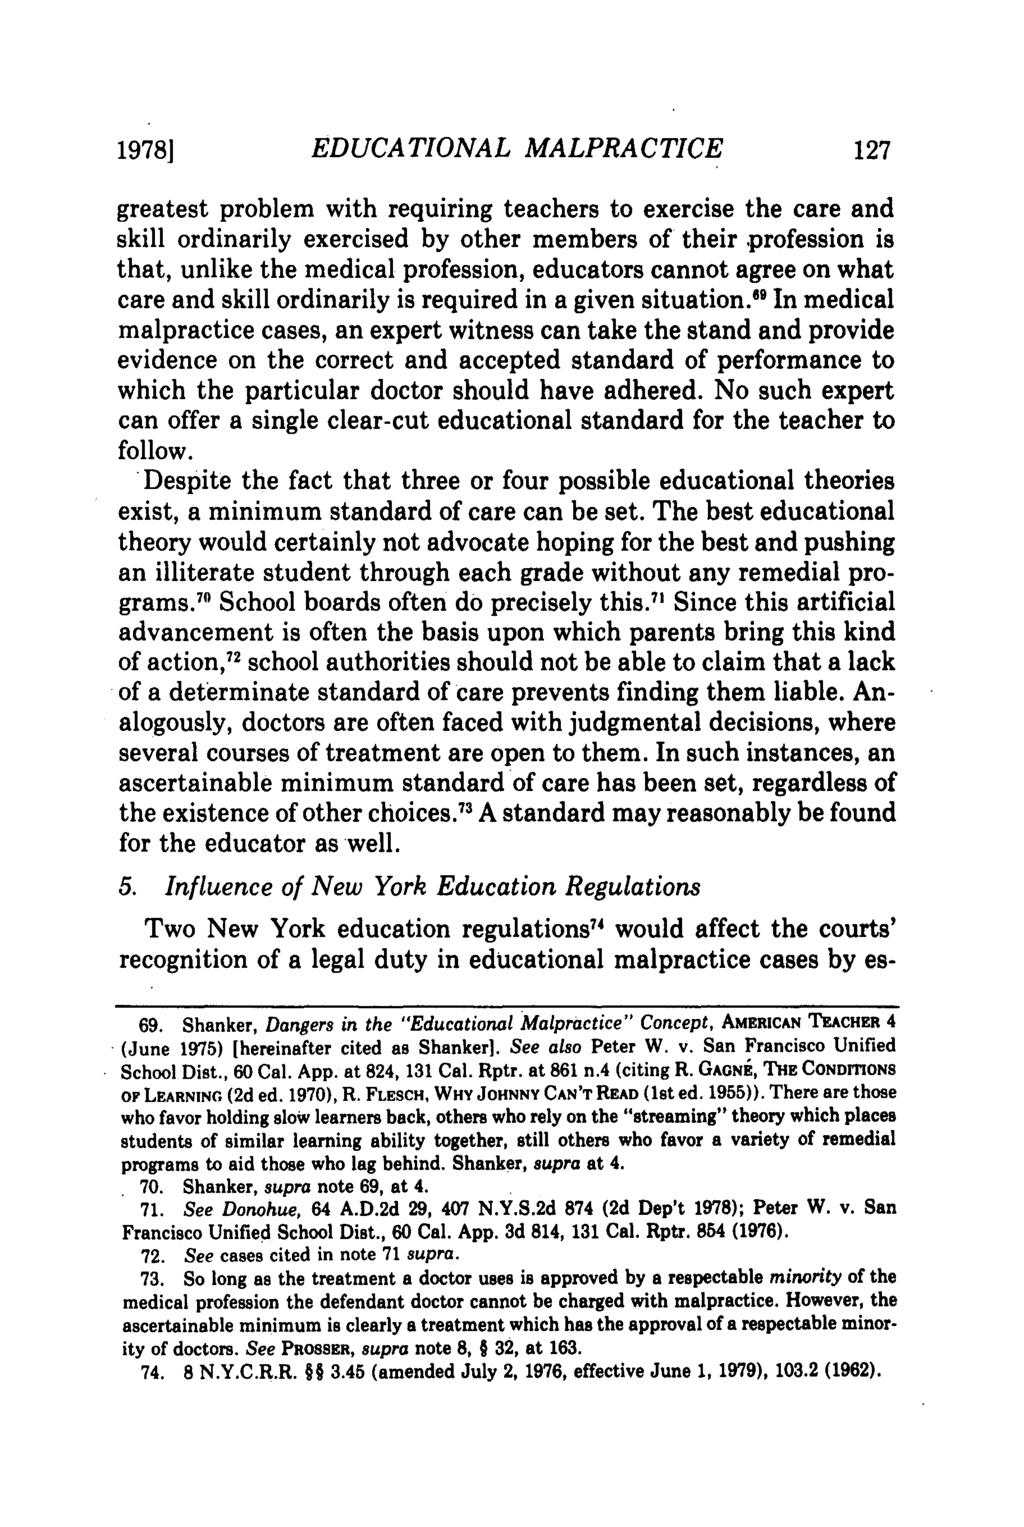 19781 EDUCATIONAL MALPRACTICE greatest problem with requiring teachers to exercise the care and skill ordinarily exercised by other members of their.